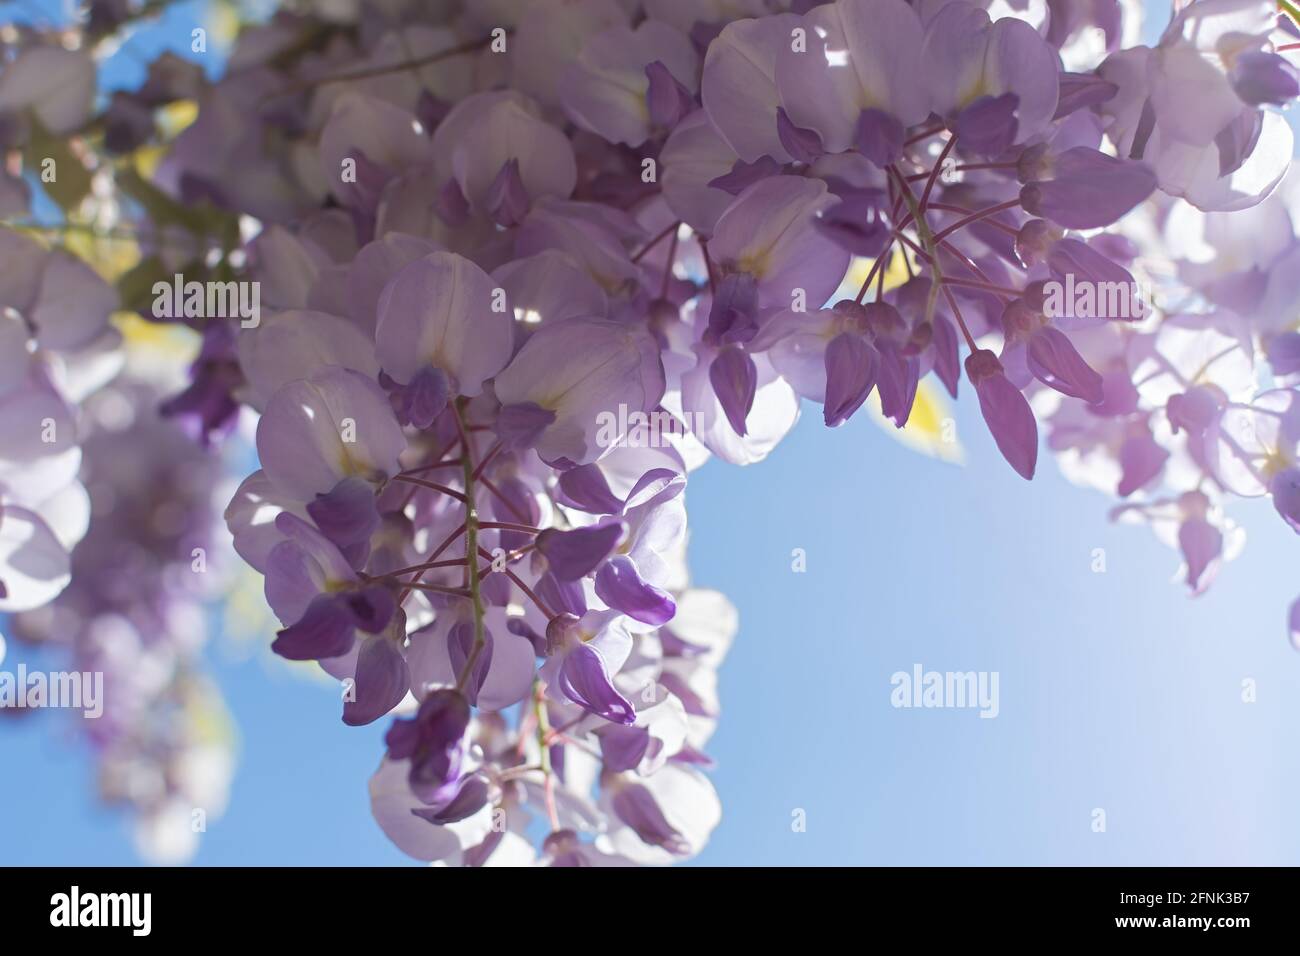 Purple wisteria close-up blooms in the spring garden. Delicate purple flowers in the bright sunlight. Beautiful atmospheric spring background. Blurry Stock Photo